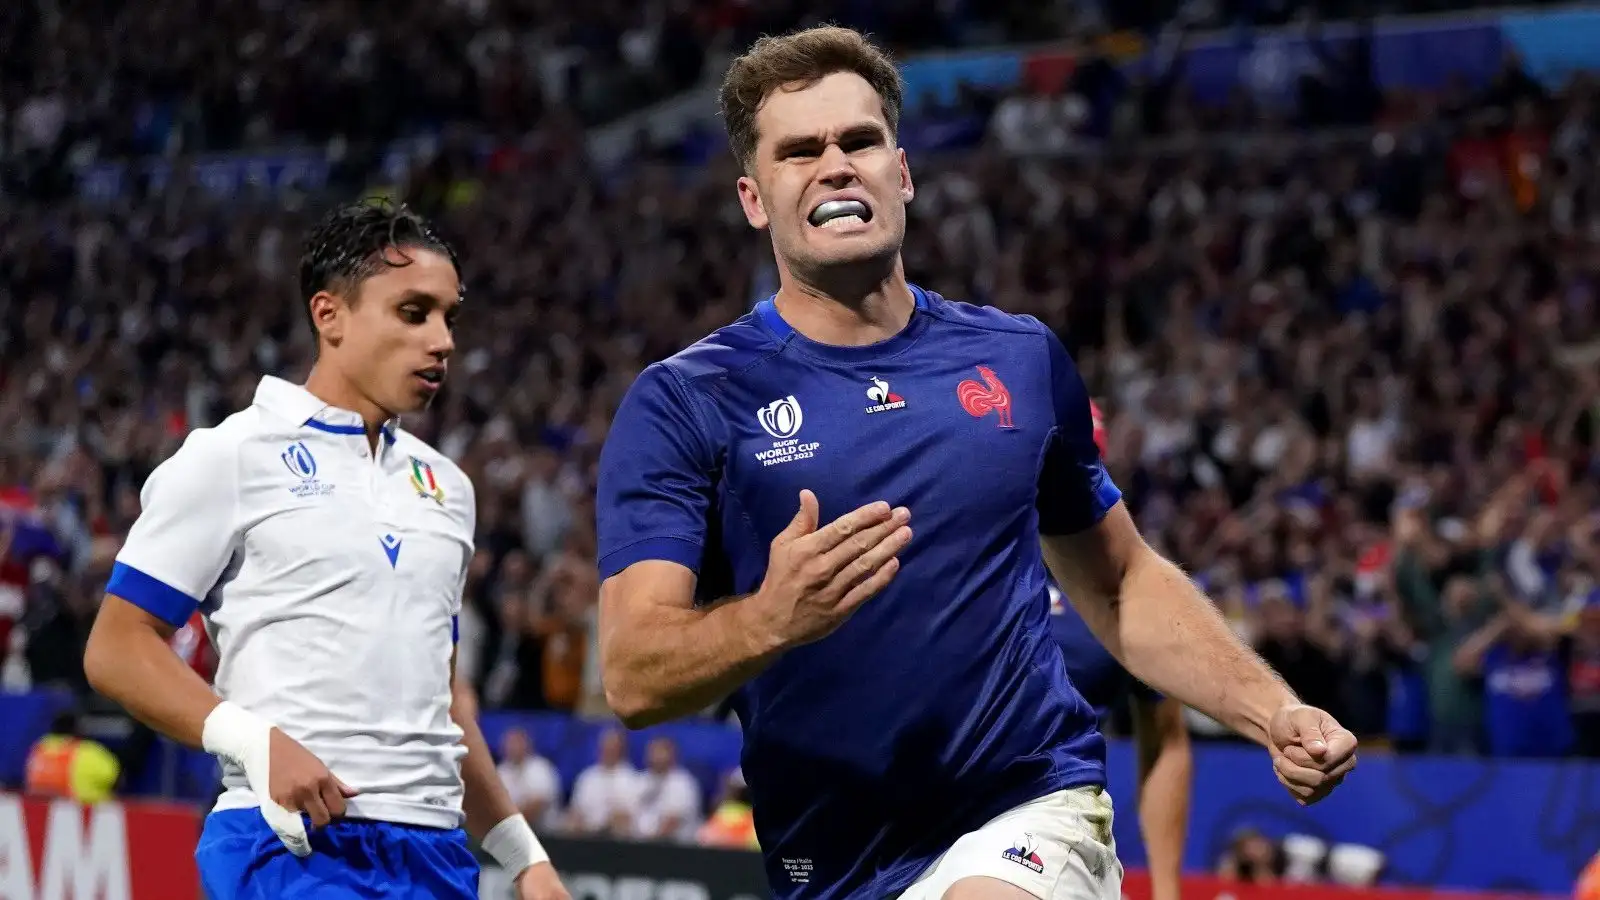 France wing Damian Penaud after scoring against Italy.